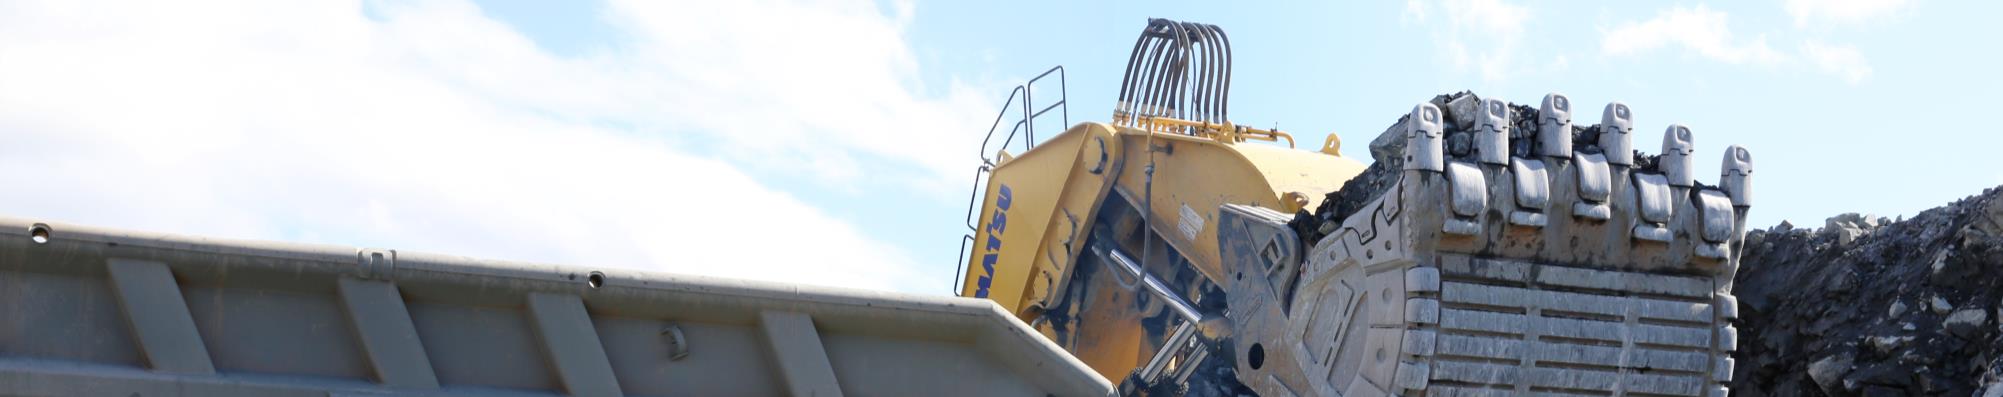 B U C K E T S Häggblom Buckets & Mining Equipment In manufacturing large and complex buckets, we harness the experience we have gained in the industry.